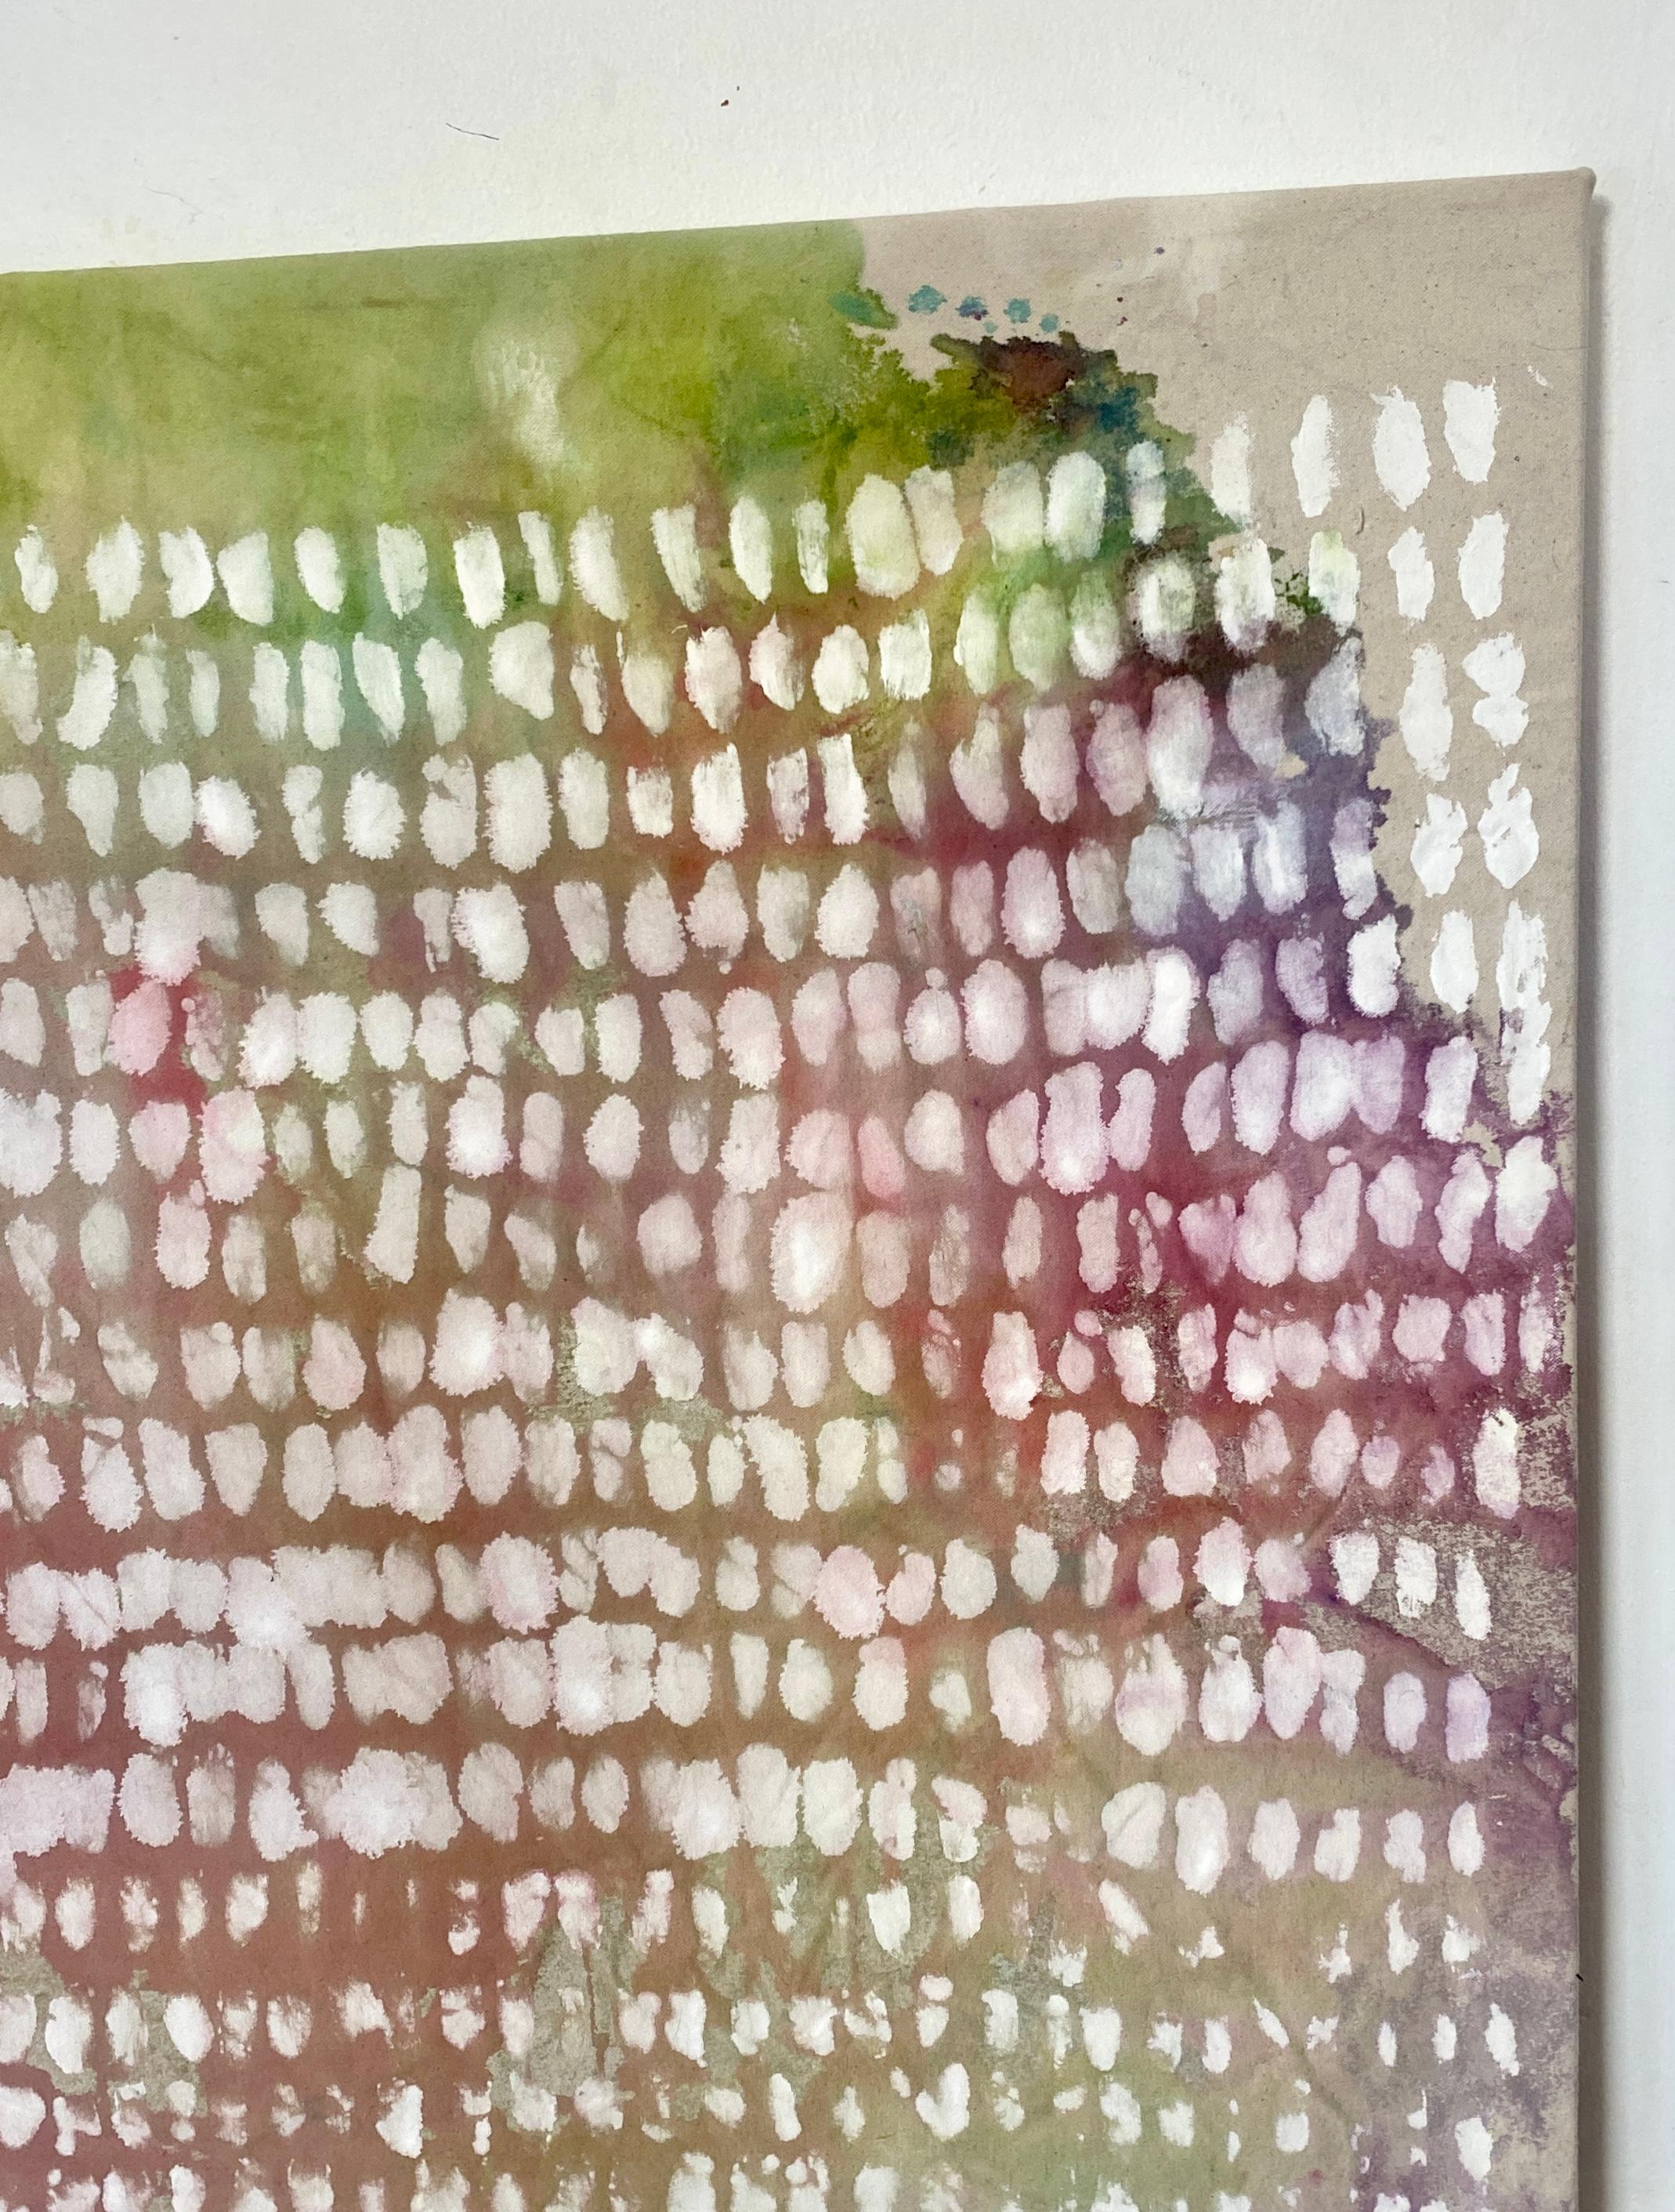 ephemeral vignette #03 - Colorful abstract stain painting, acrylic on raw canvas - Color-Field Painting by Elisa Niva